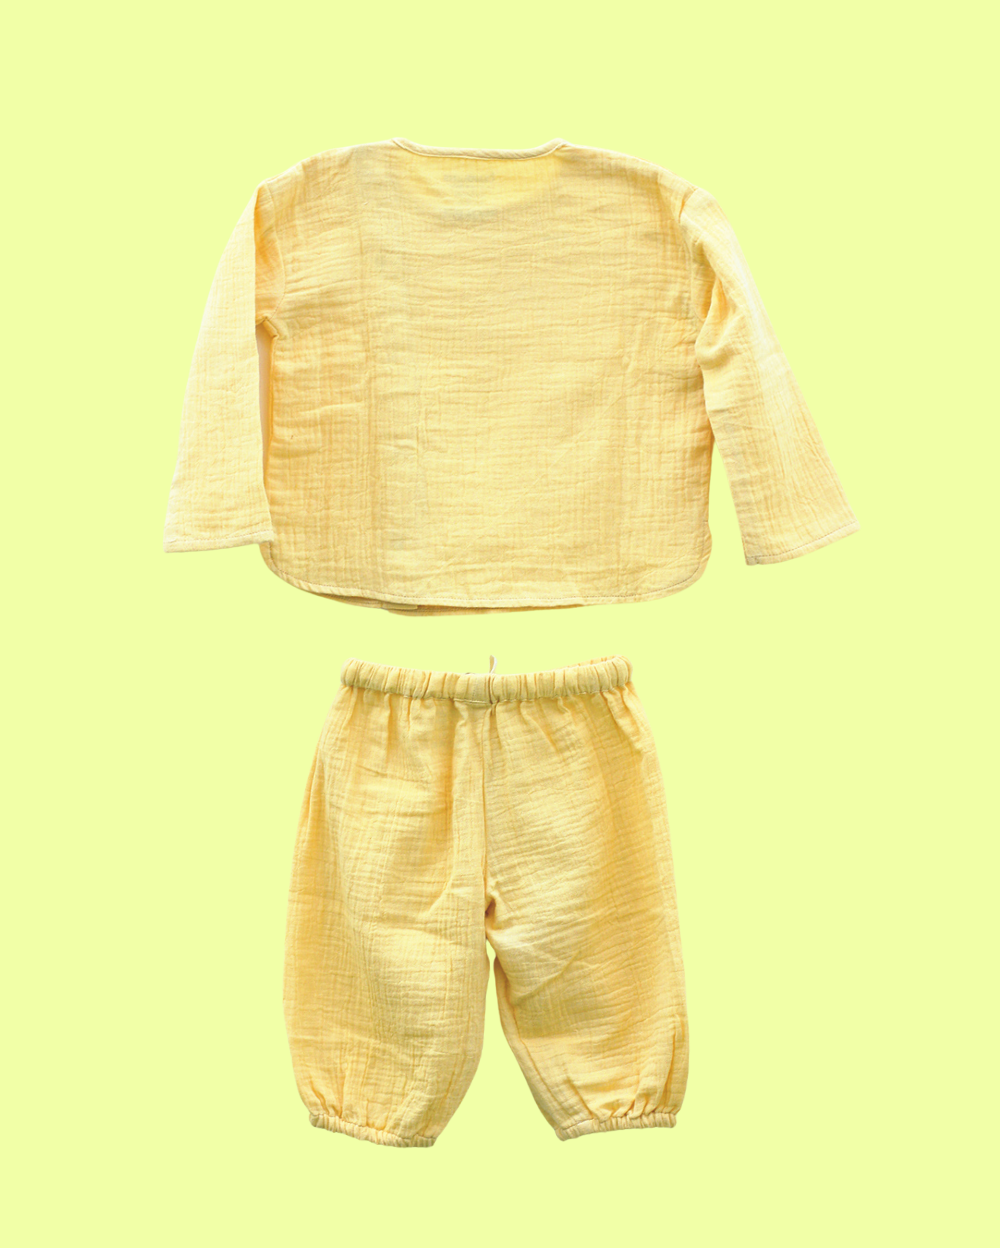 100% Natural Cotton Baby Sets for Baby Boys – 2 Piece Set